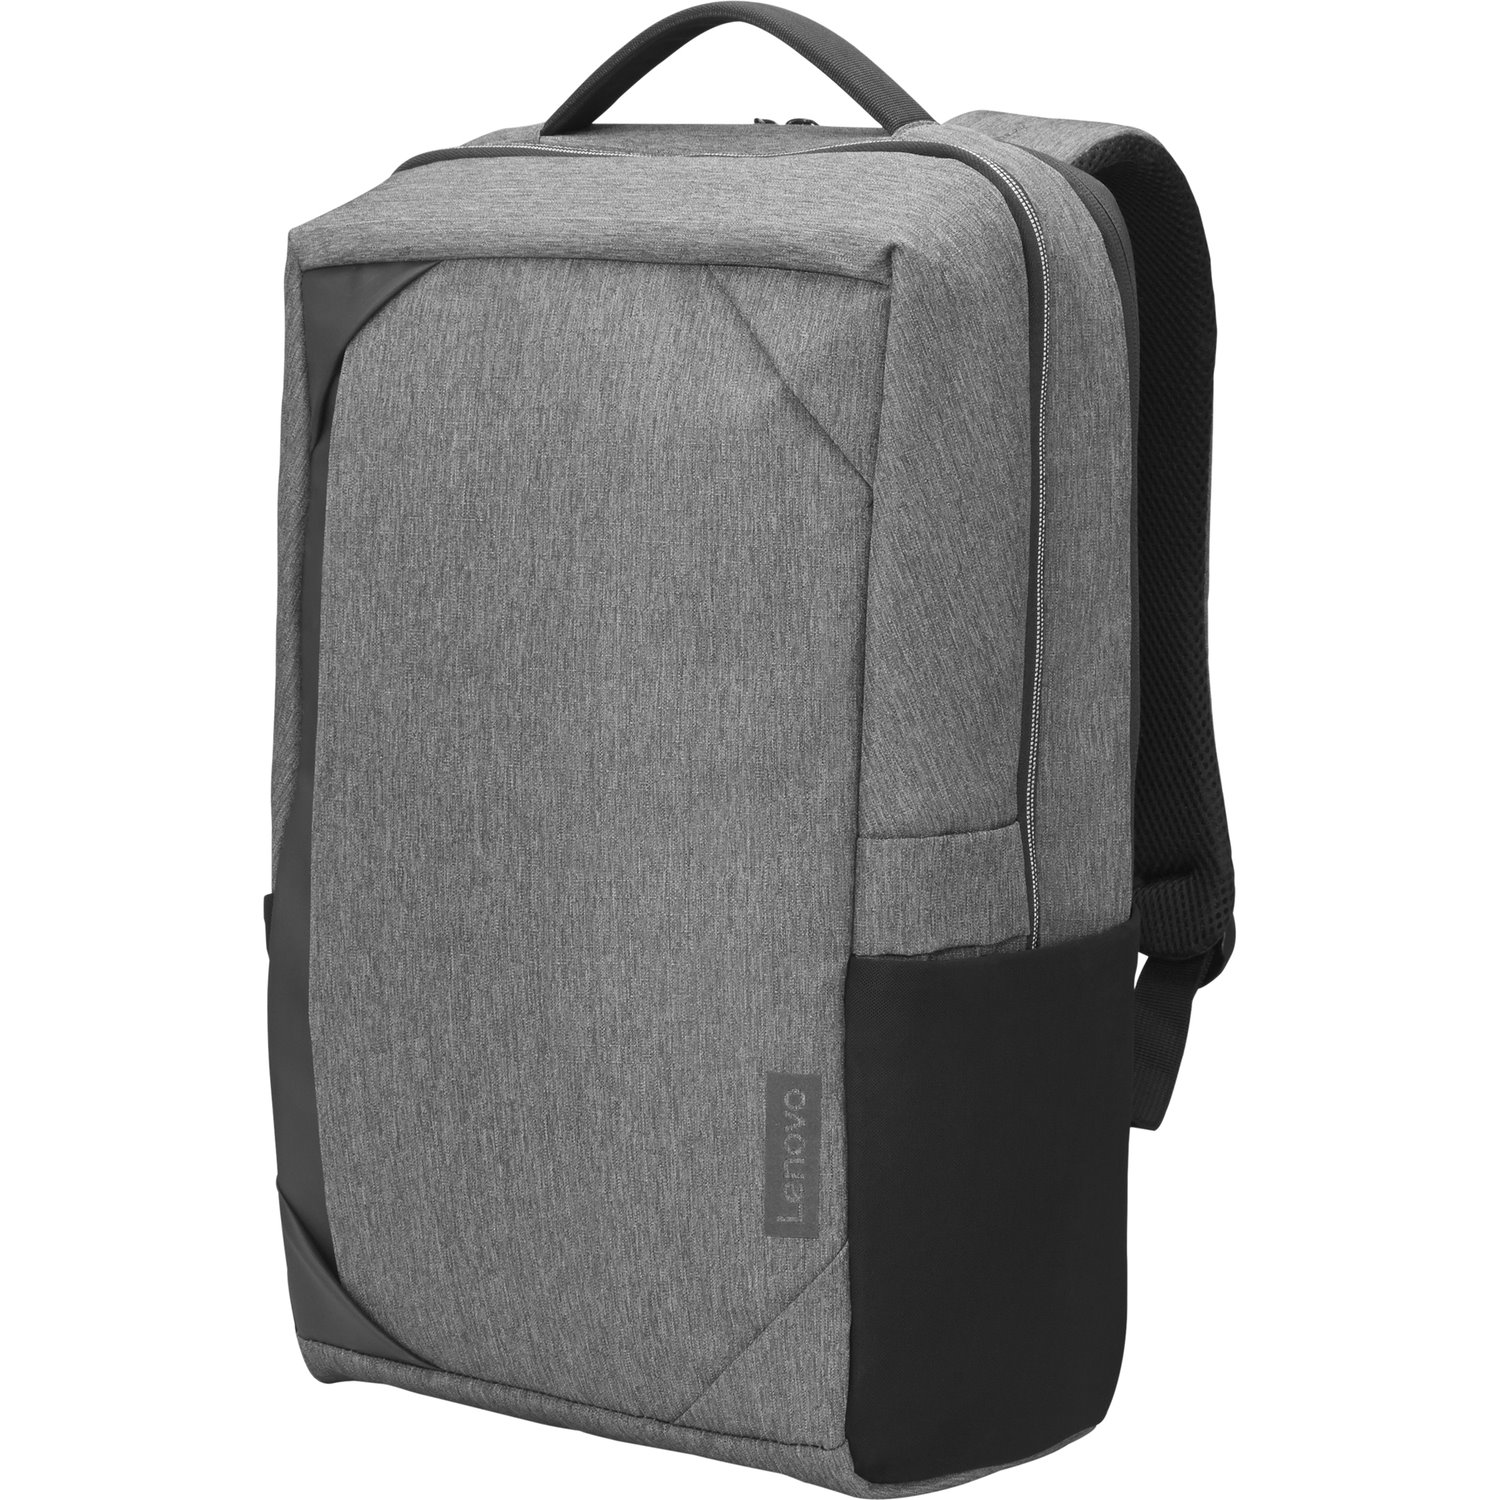 Lenovo Carrying Case (Backpack) for 39.6 cm (15.6") Notebook - Charcoal Grey